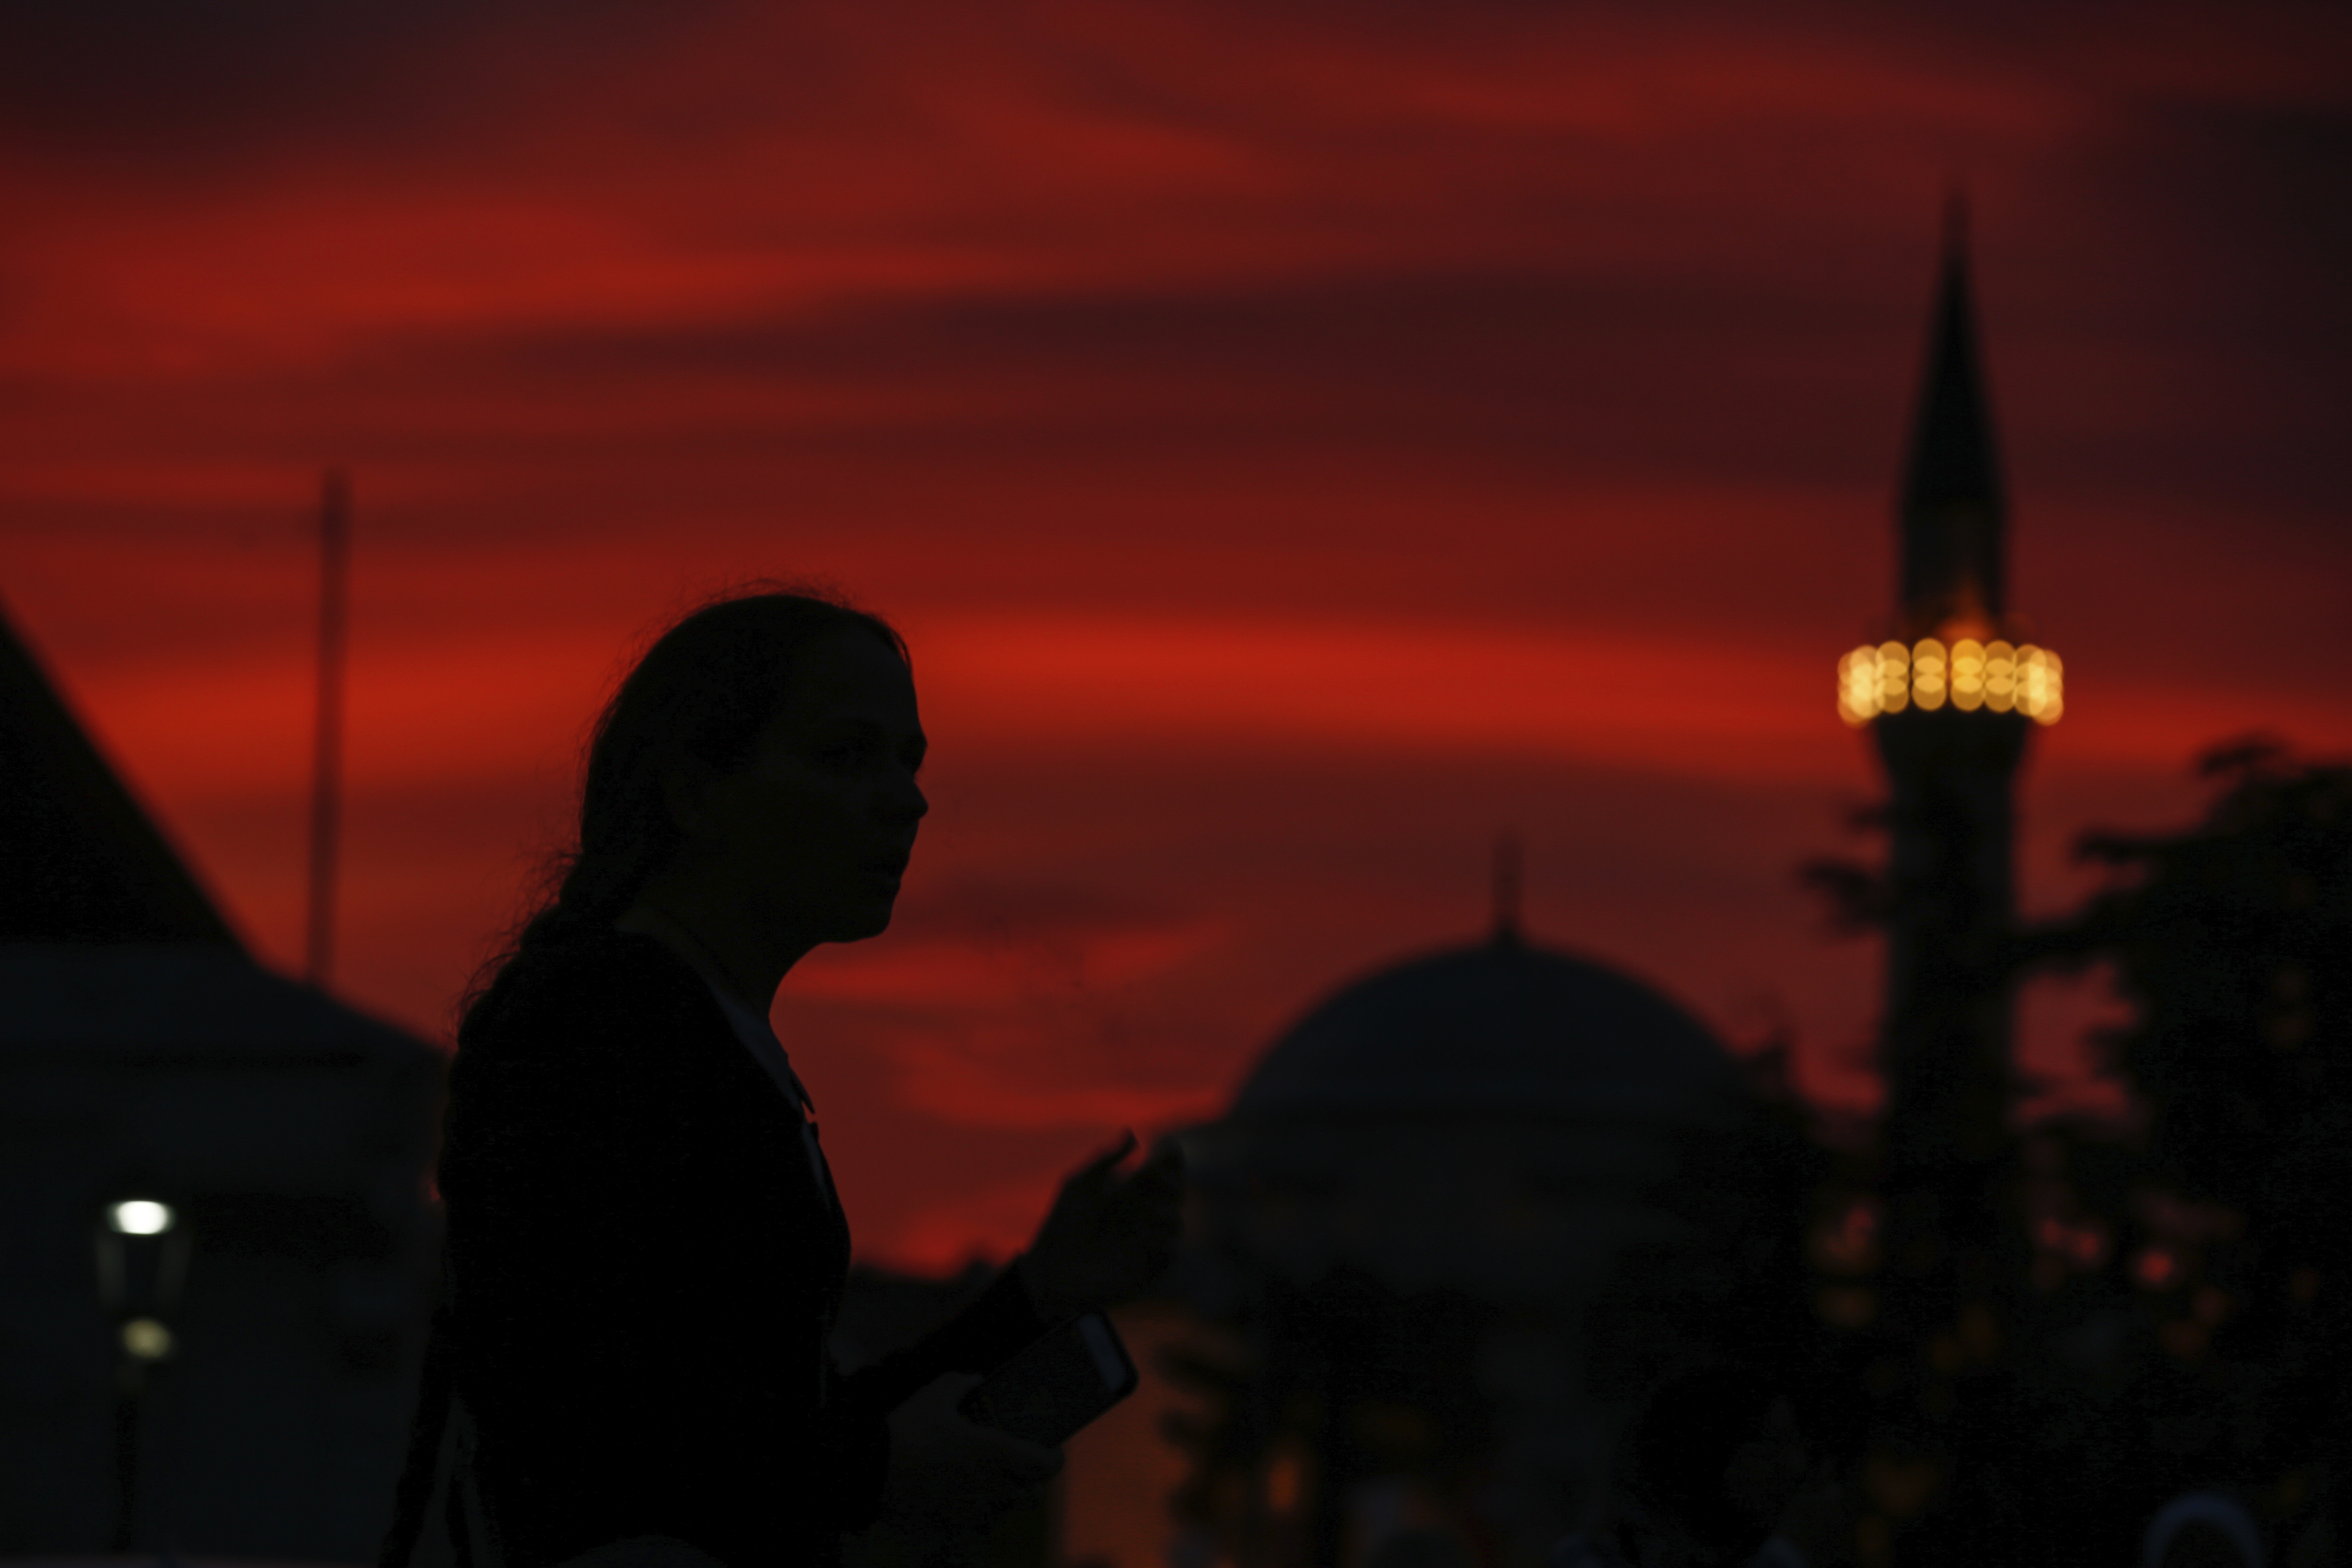 People walk in the historic Sultanahmet district of Istanbul, Wednesday, May 16, 2018 on the first day of the fasting month of Ramadan. Muslims throughout the world are marking Ramadan - a month of fasting during which the observants abstain from food, drink and other pleasures from sunrise to sunset. After an obligatory sunset prayer, a large feast known as 'iftar' is shared with family and friends. (AP Photo/Emrah Gurel)